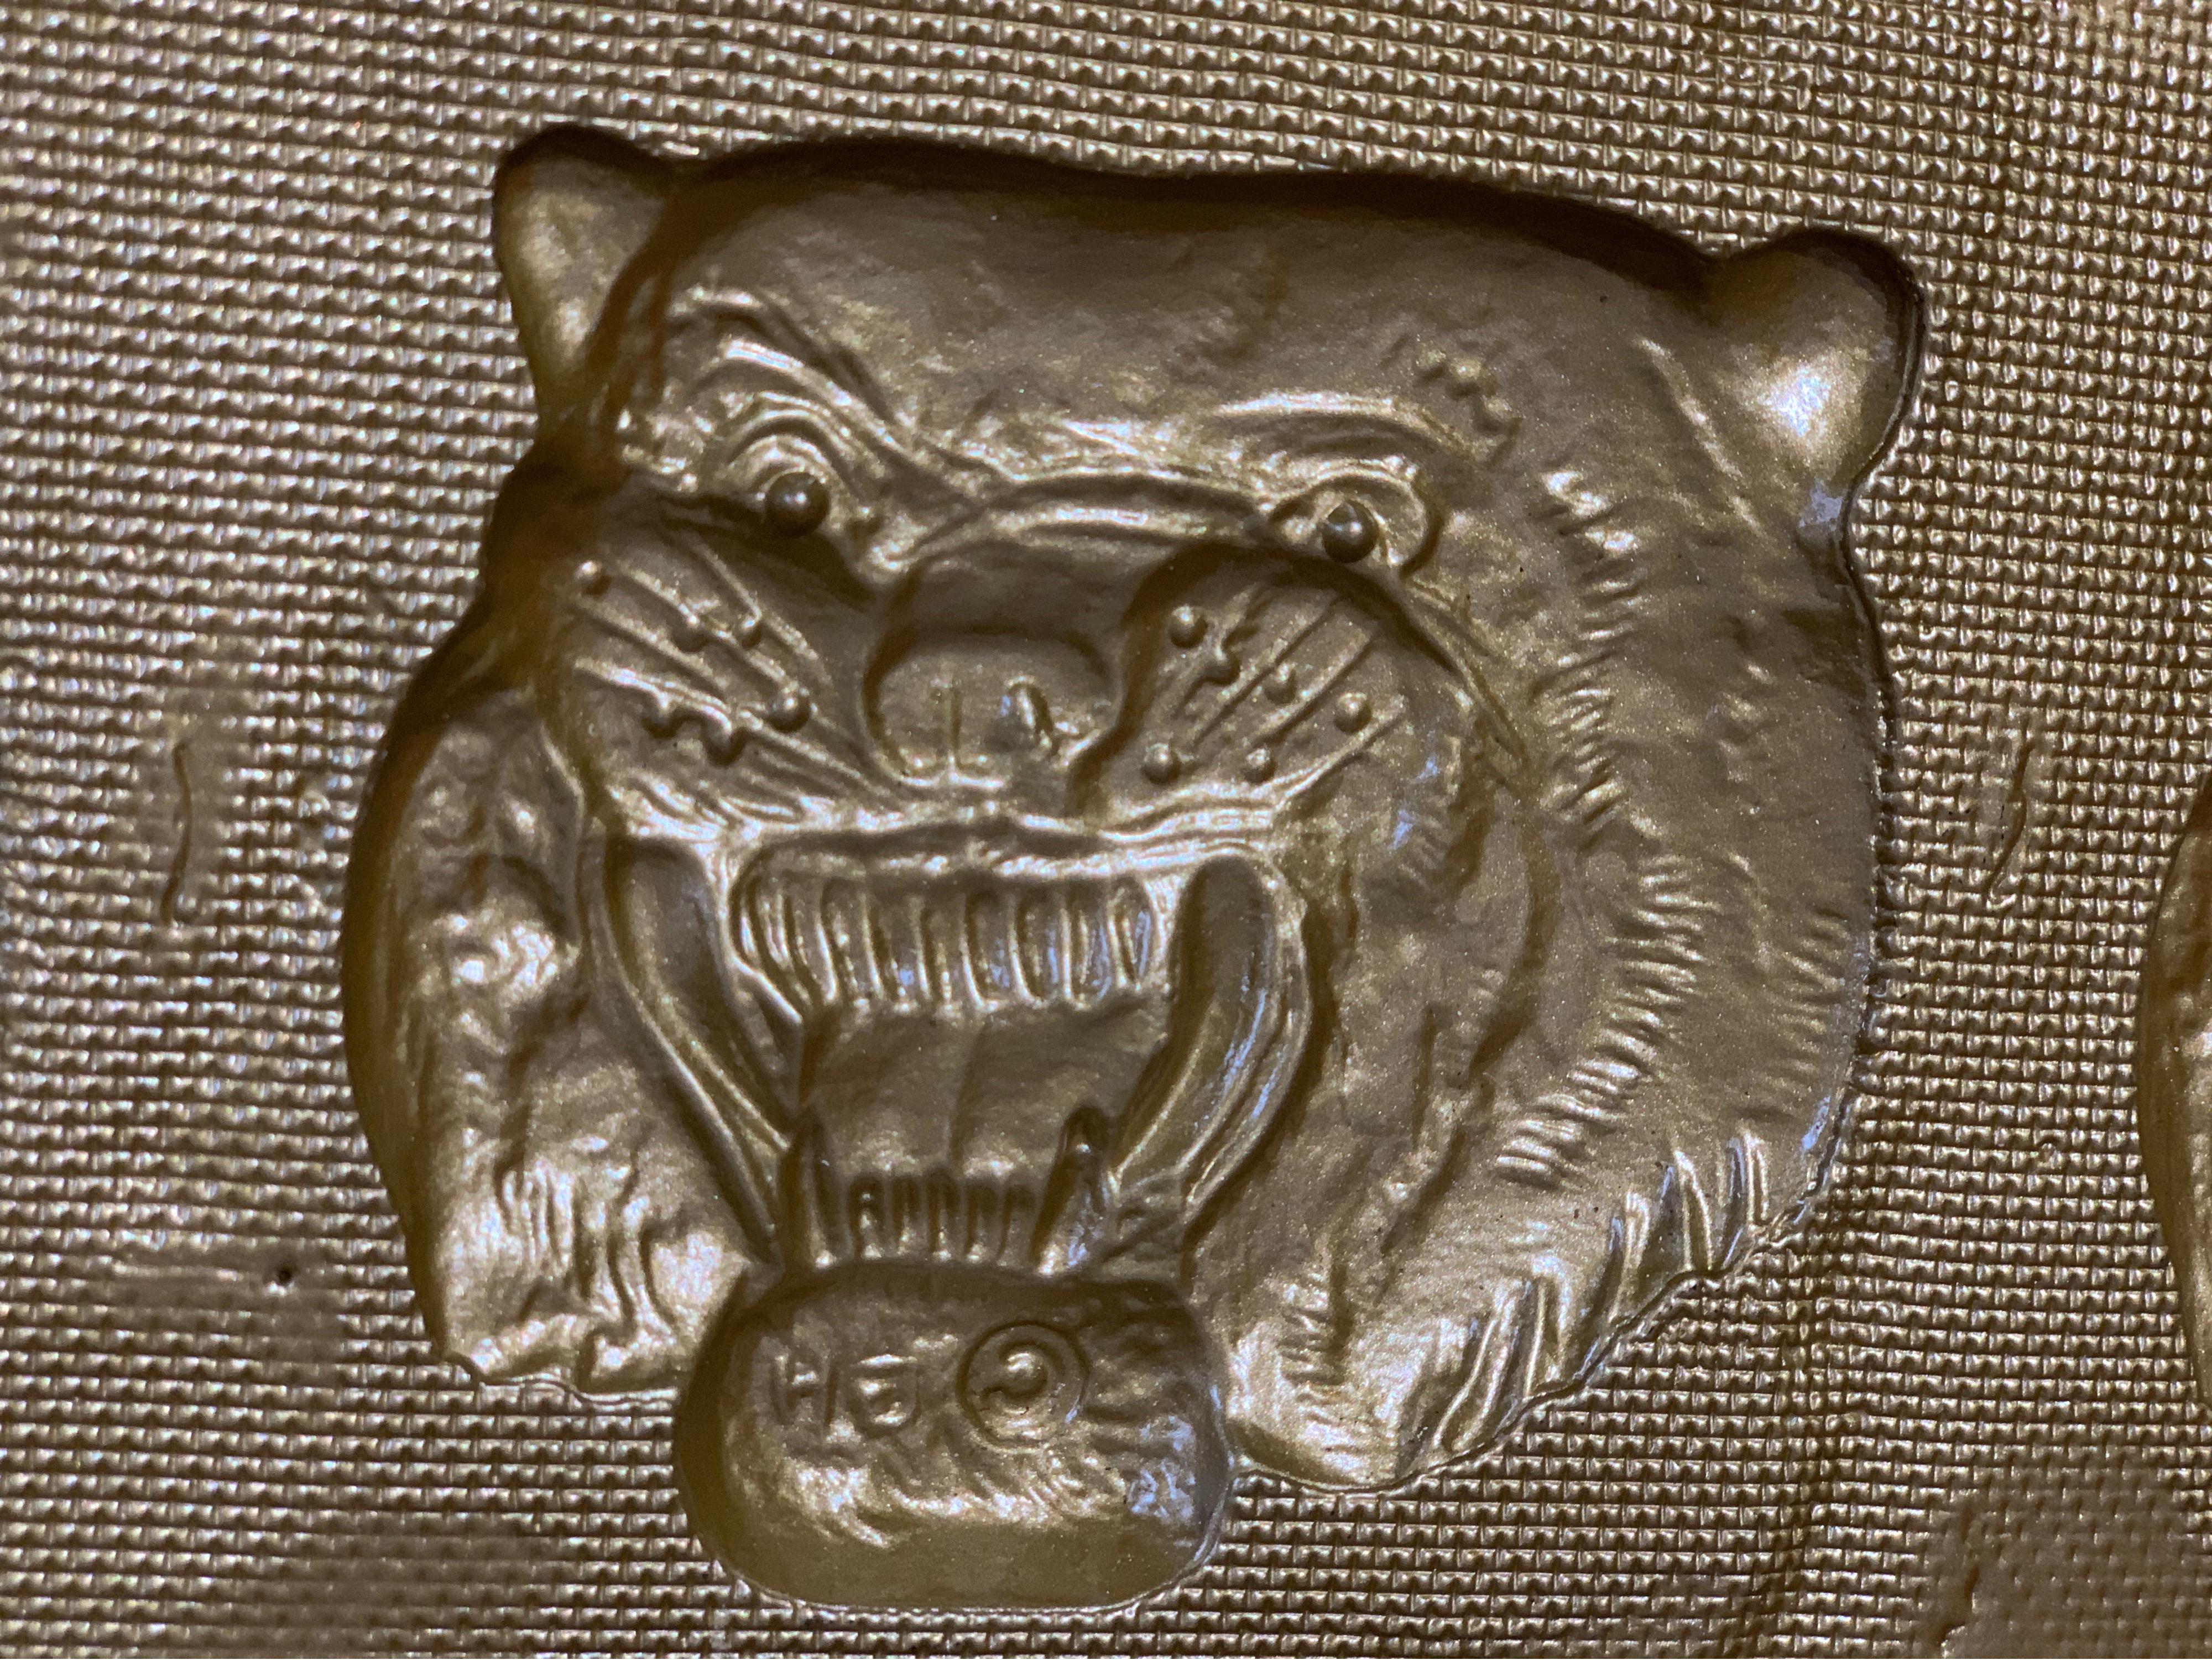 20th Century Midcentury Roaring Tiger Bronze-Finish Wall or Ceiling Tiles, Decorative Plates